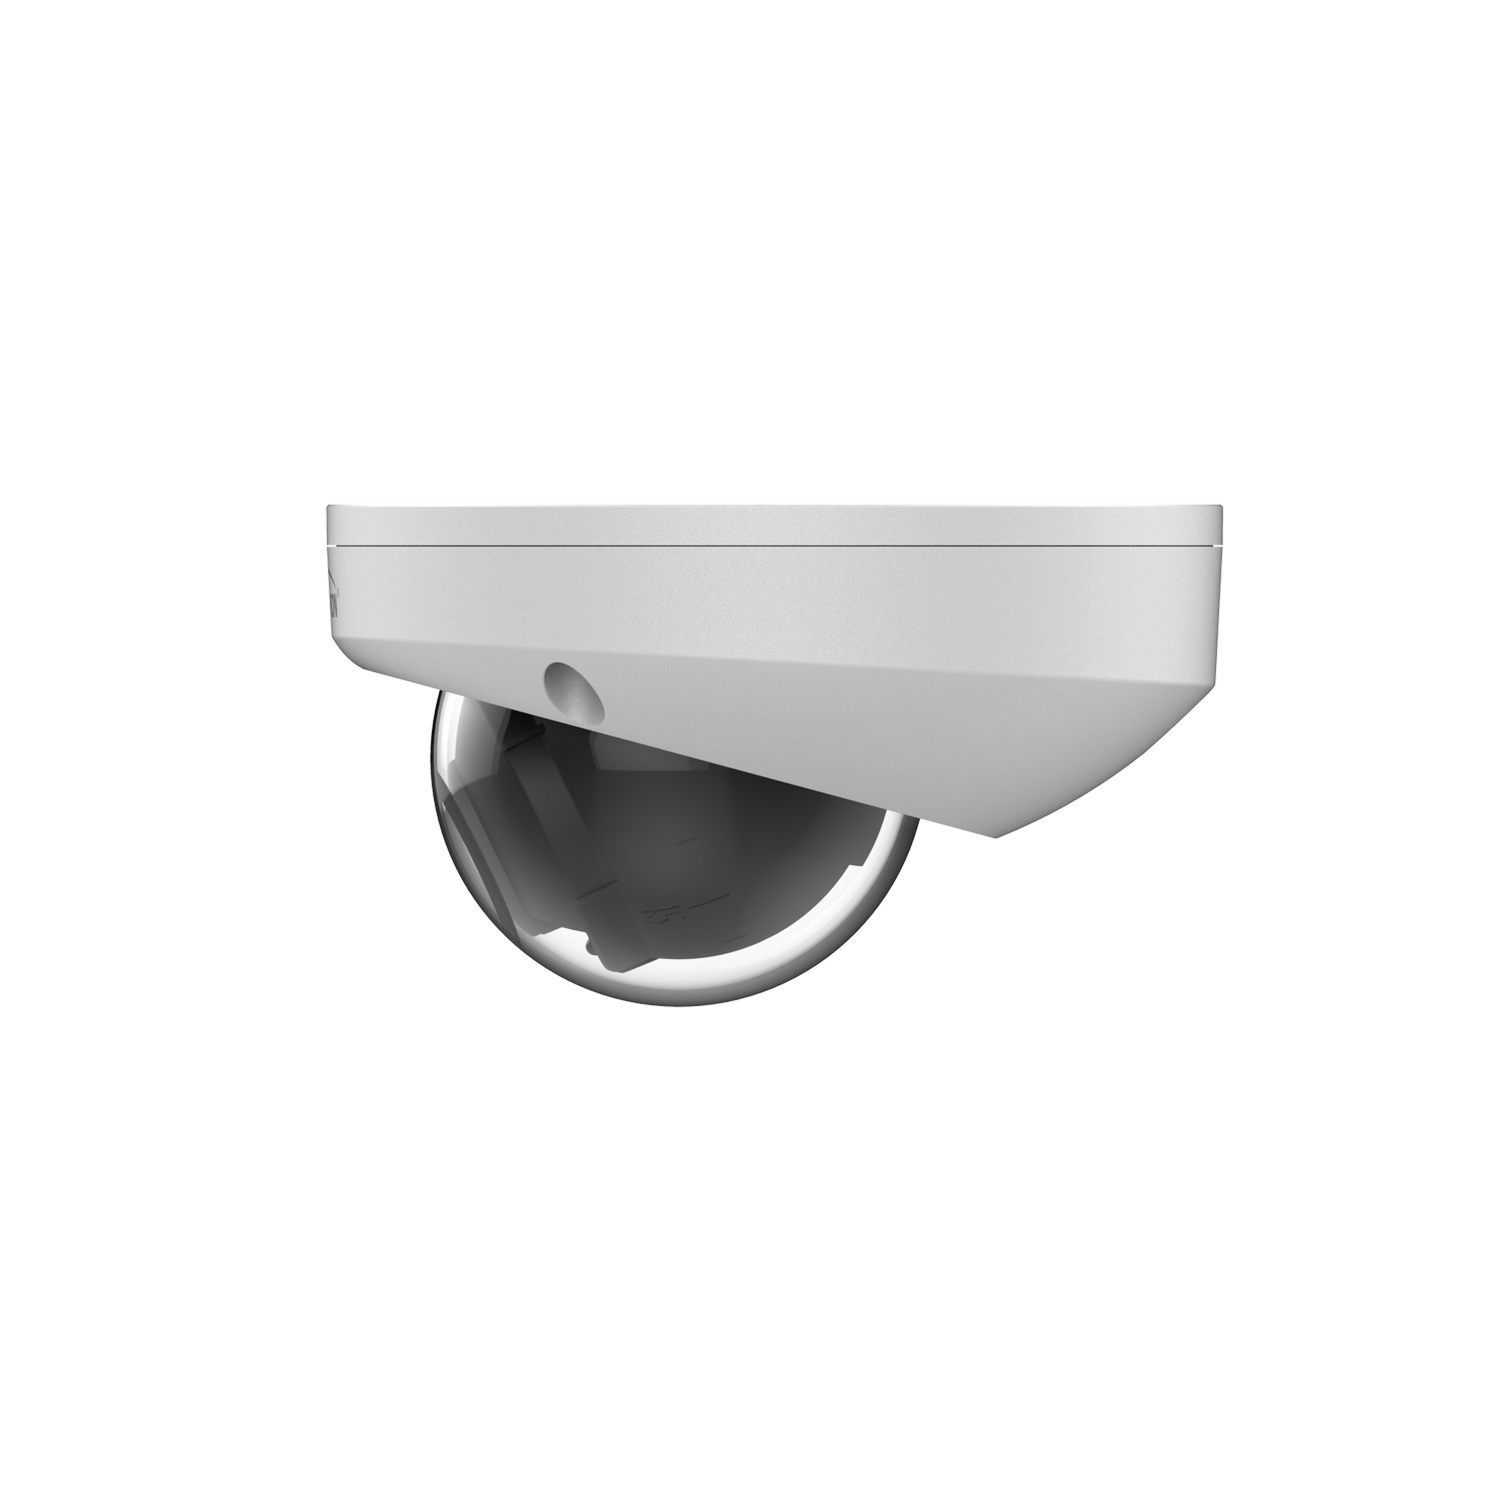 4 MP Outdoor Intelligent Fixed Dome Wedge Camera - Gyration